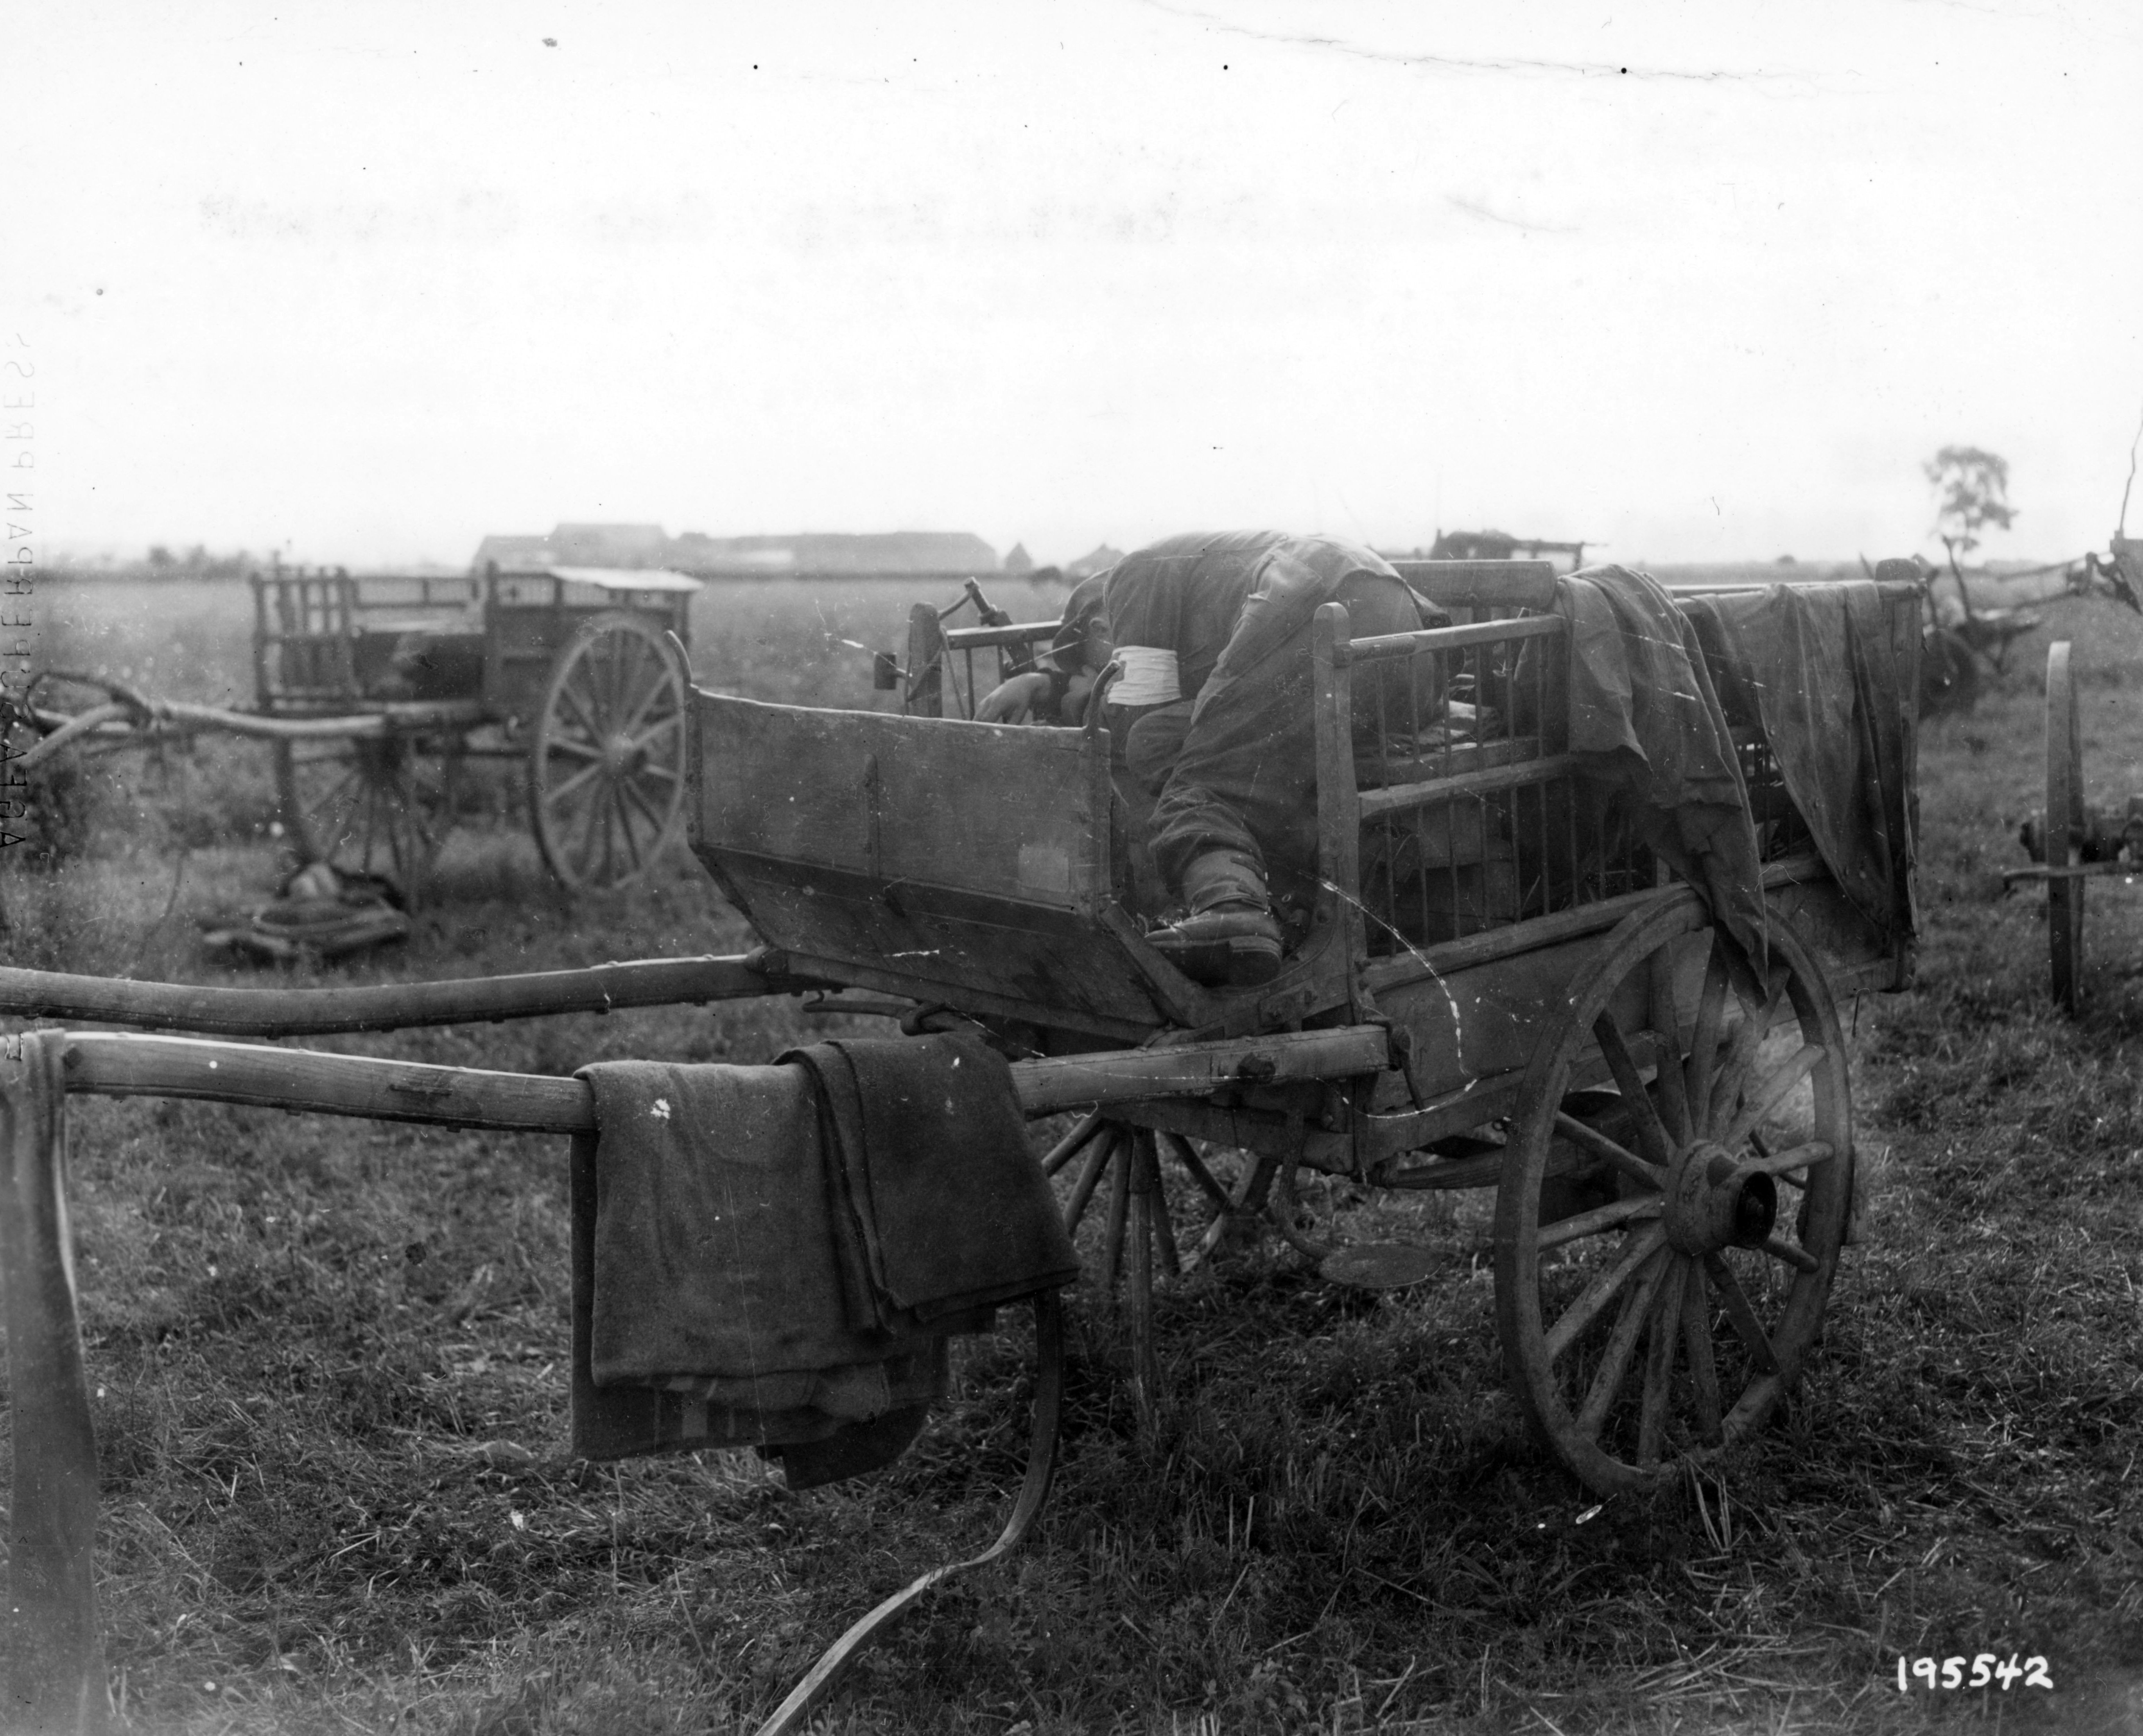 Wounded German in a wagon somewhere in France.